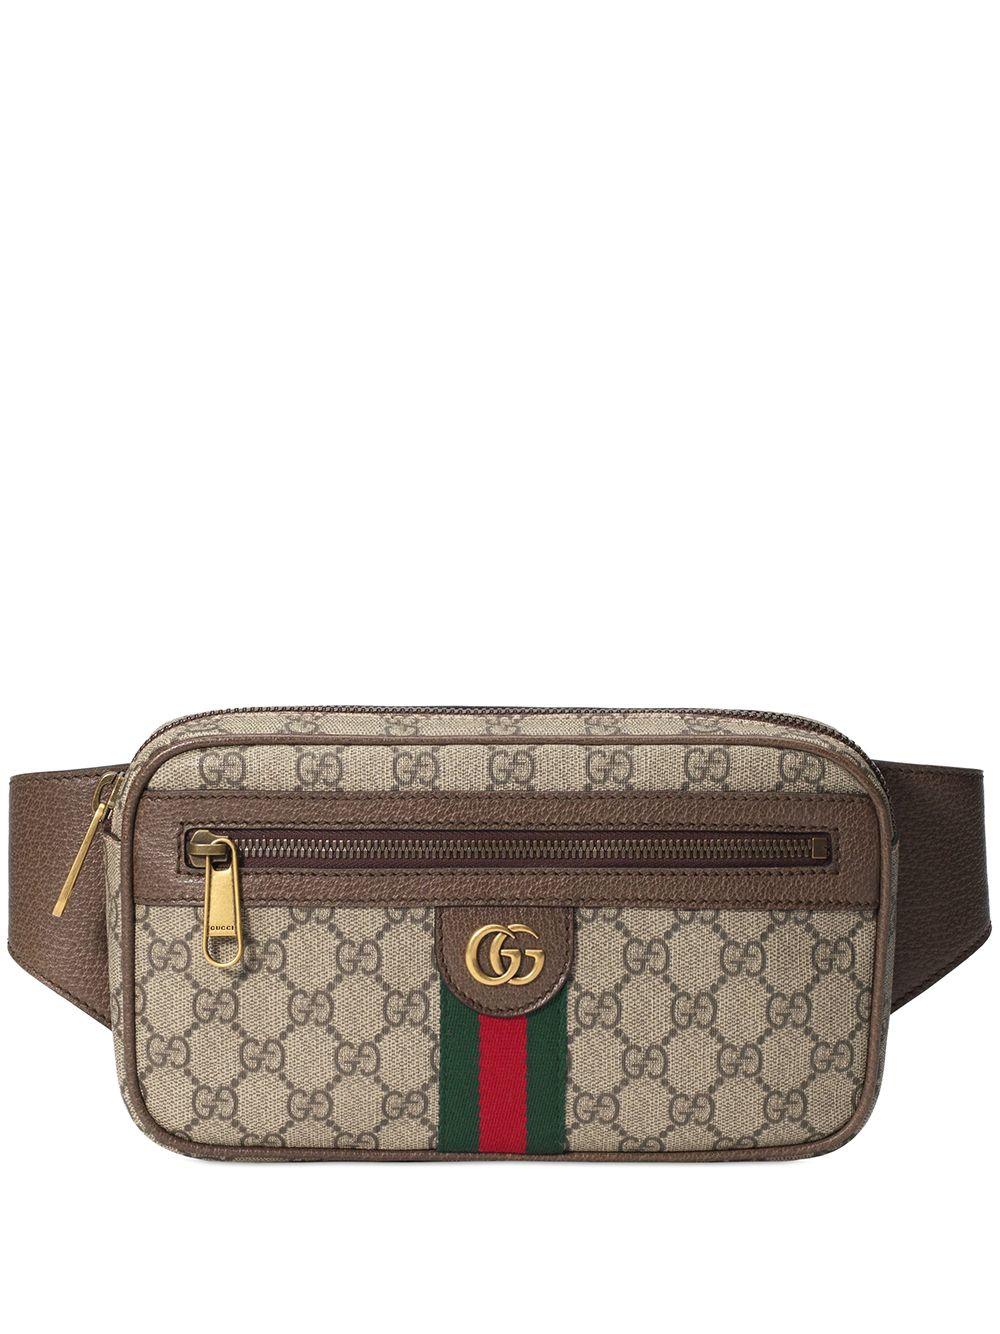 Gucci Mens Beige Ophidia GG Supreme Canvas Belt Bag One Size in Natural for  Men - Save 35% - Lyst